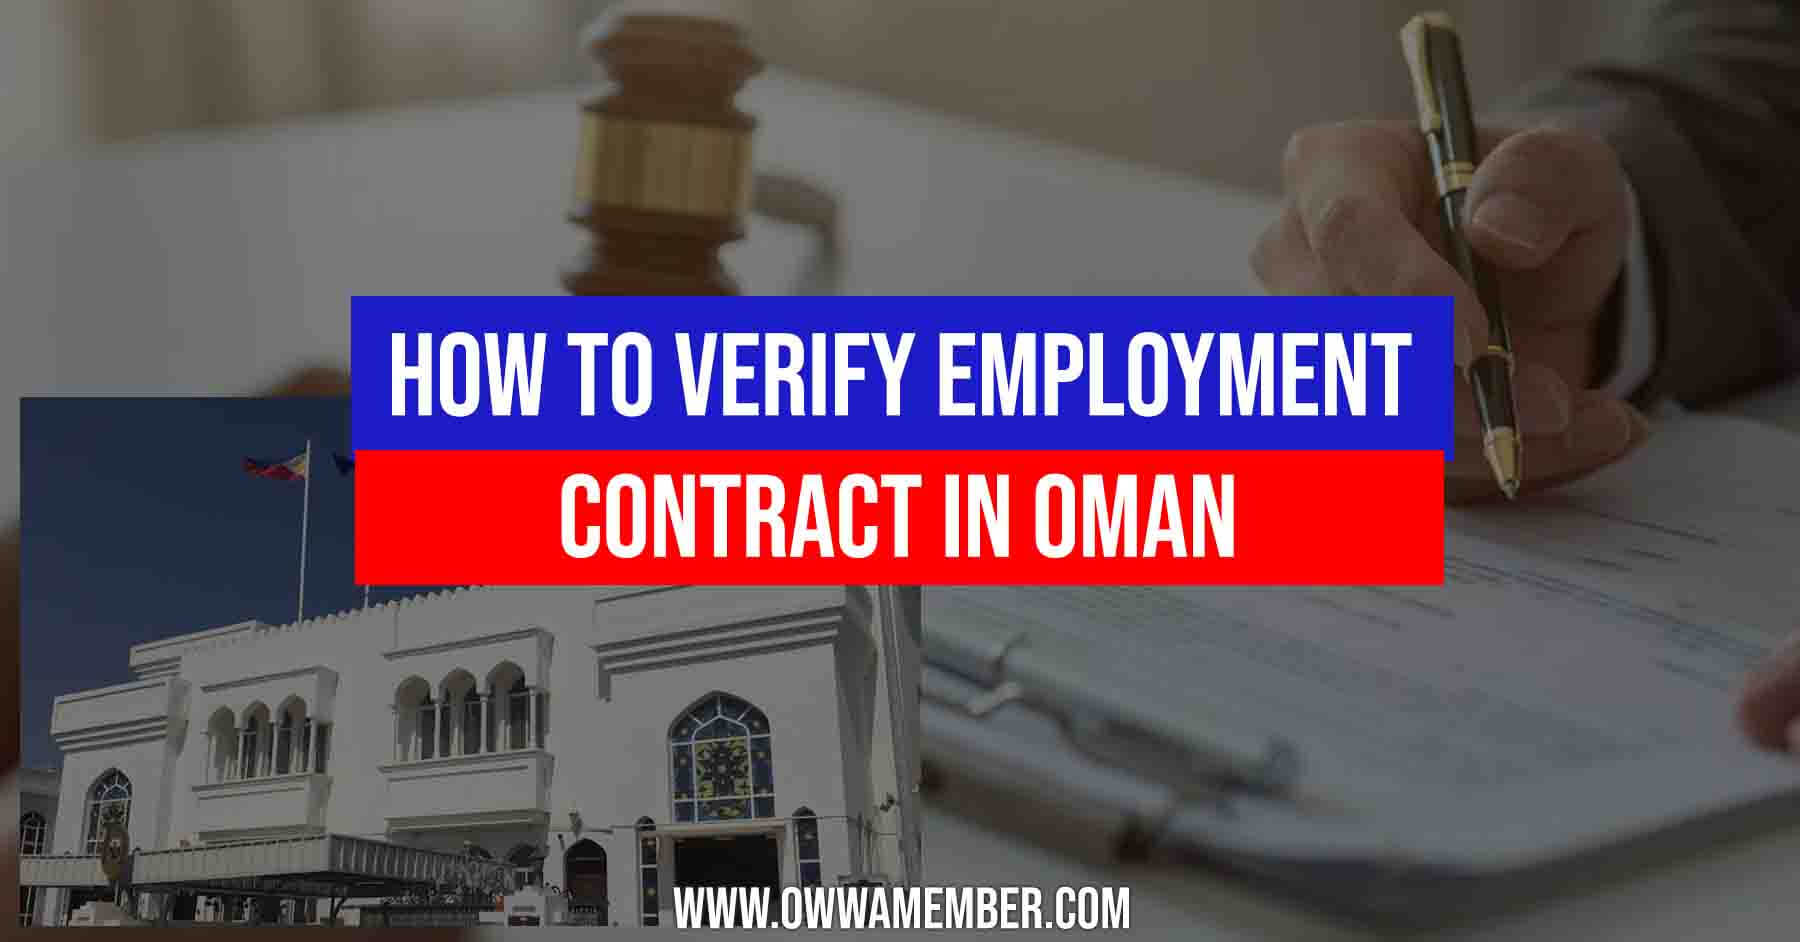 contract verification process in oman